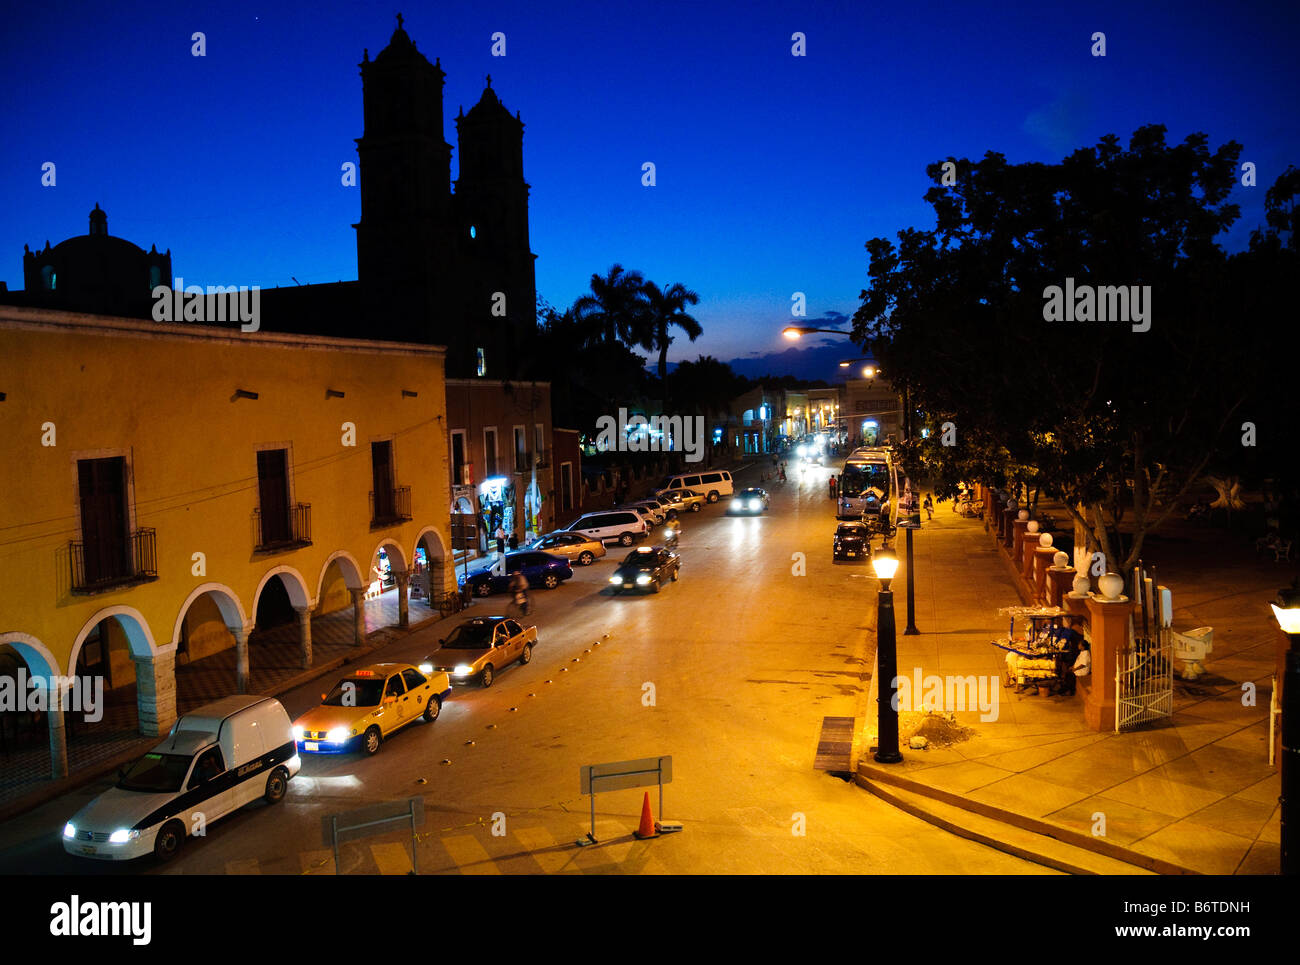 VALLADOLID, Mexico - Street scene taken from balcony of City Hall in downtown Valladolid, Yucatan, Mexico Stock Photo